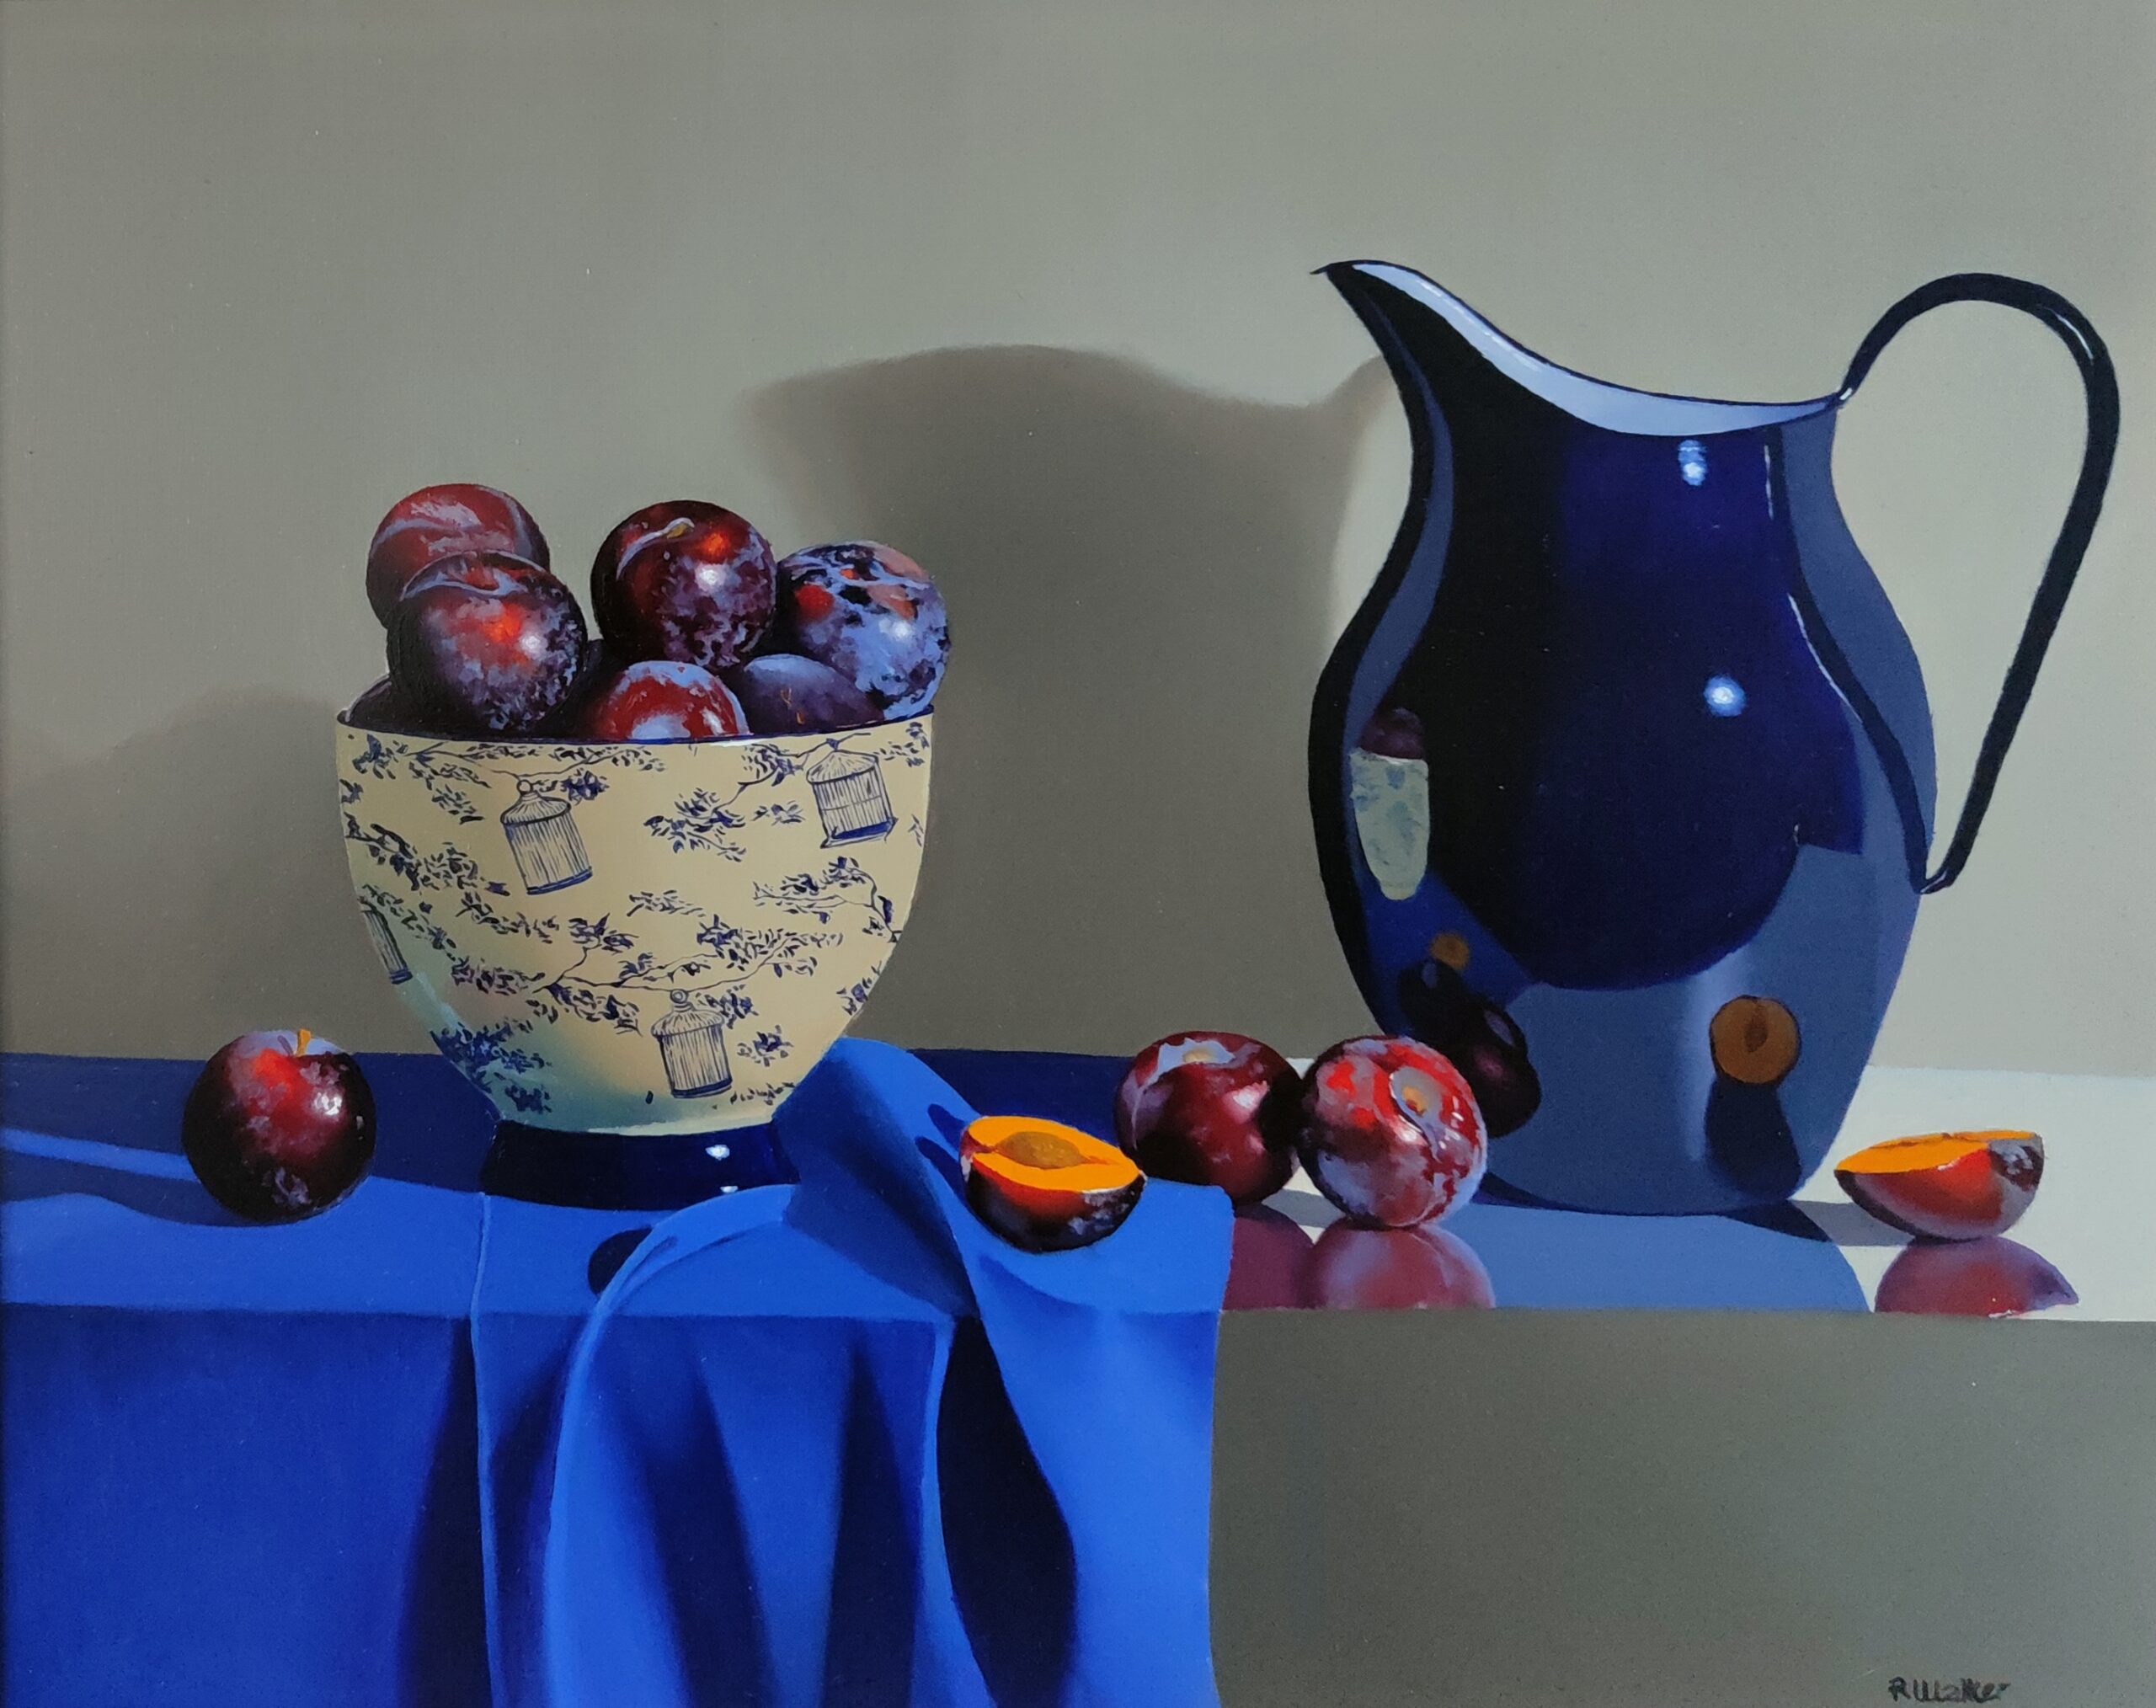 Blue Jug and Plums